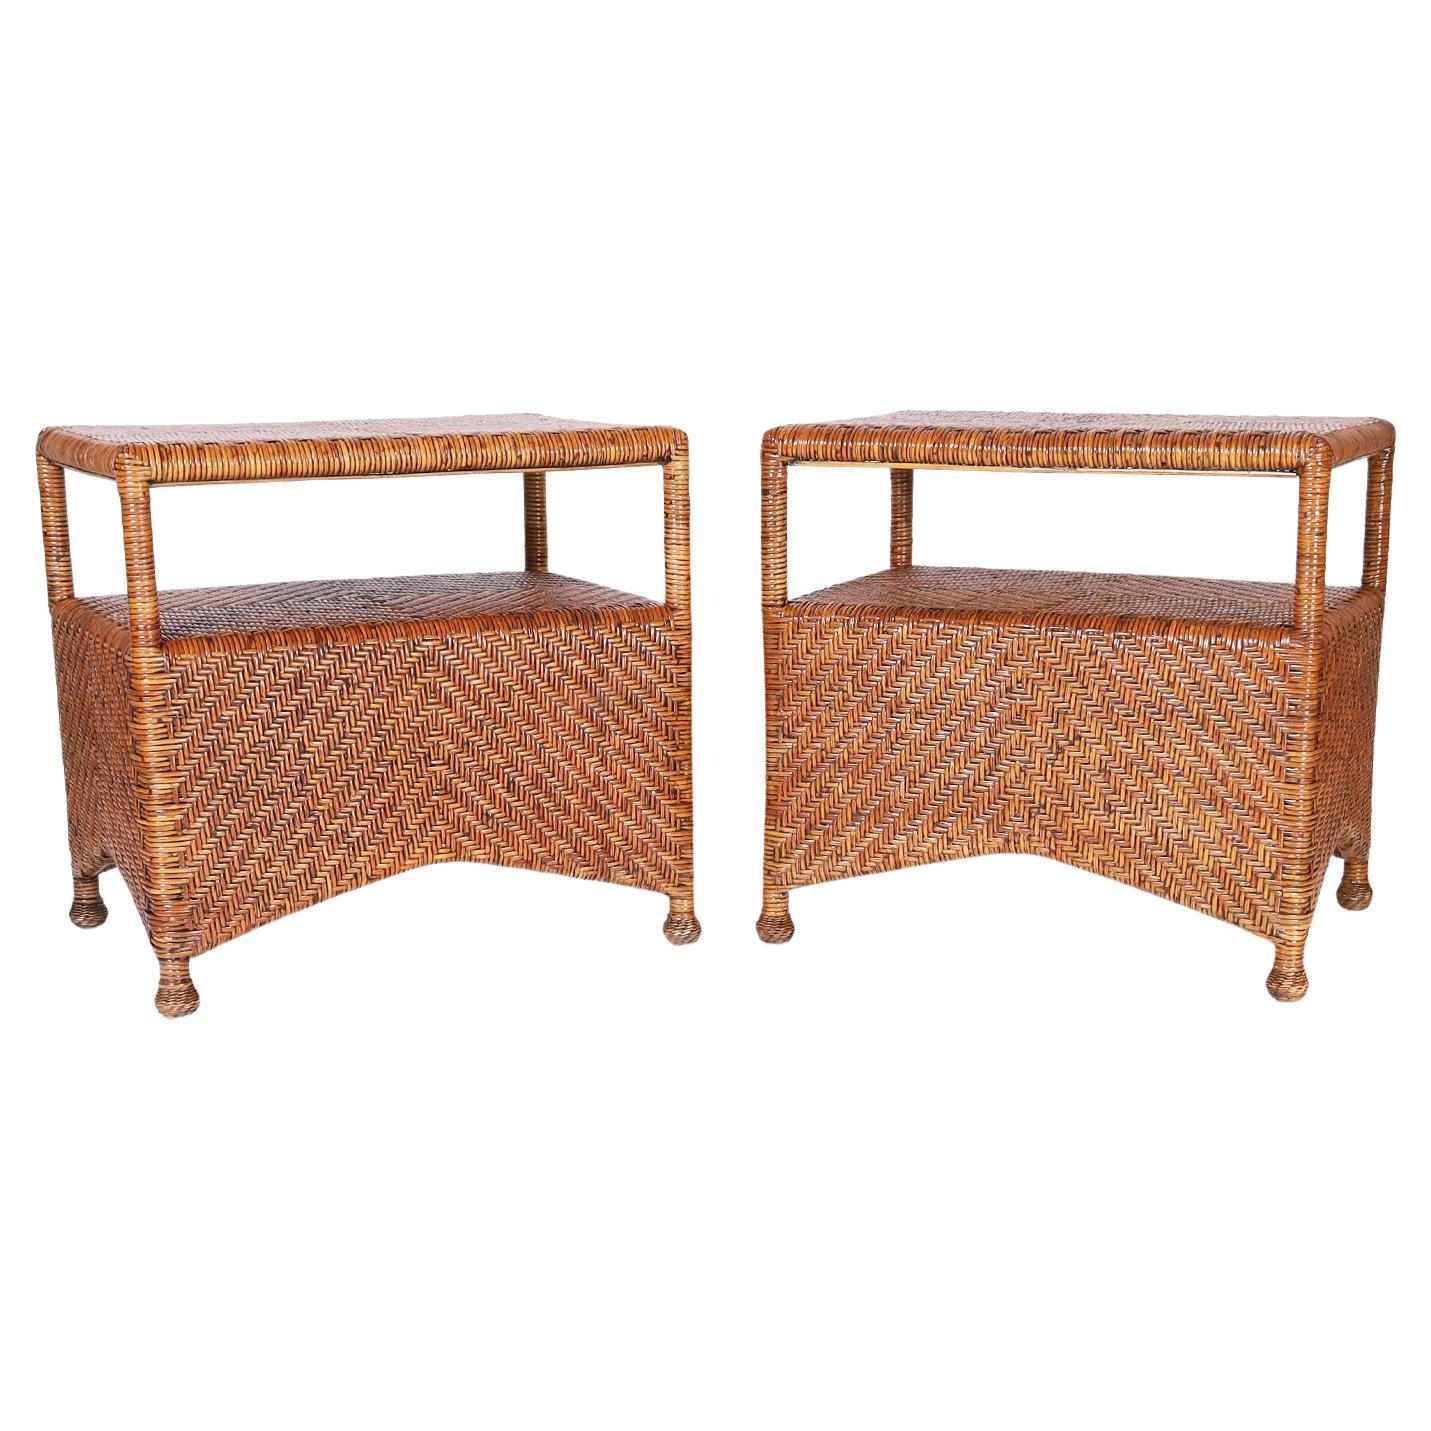 Pair of Reed Wrapped End Tables or Stands